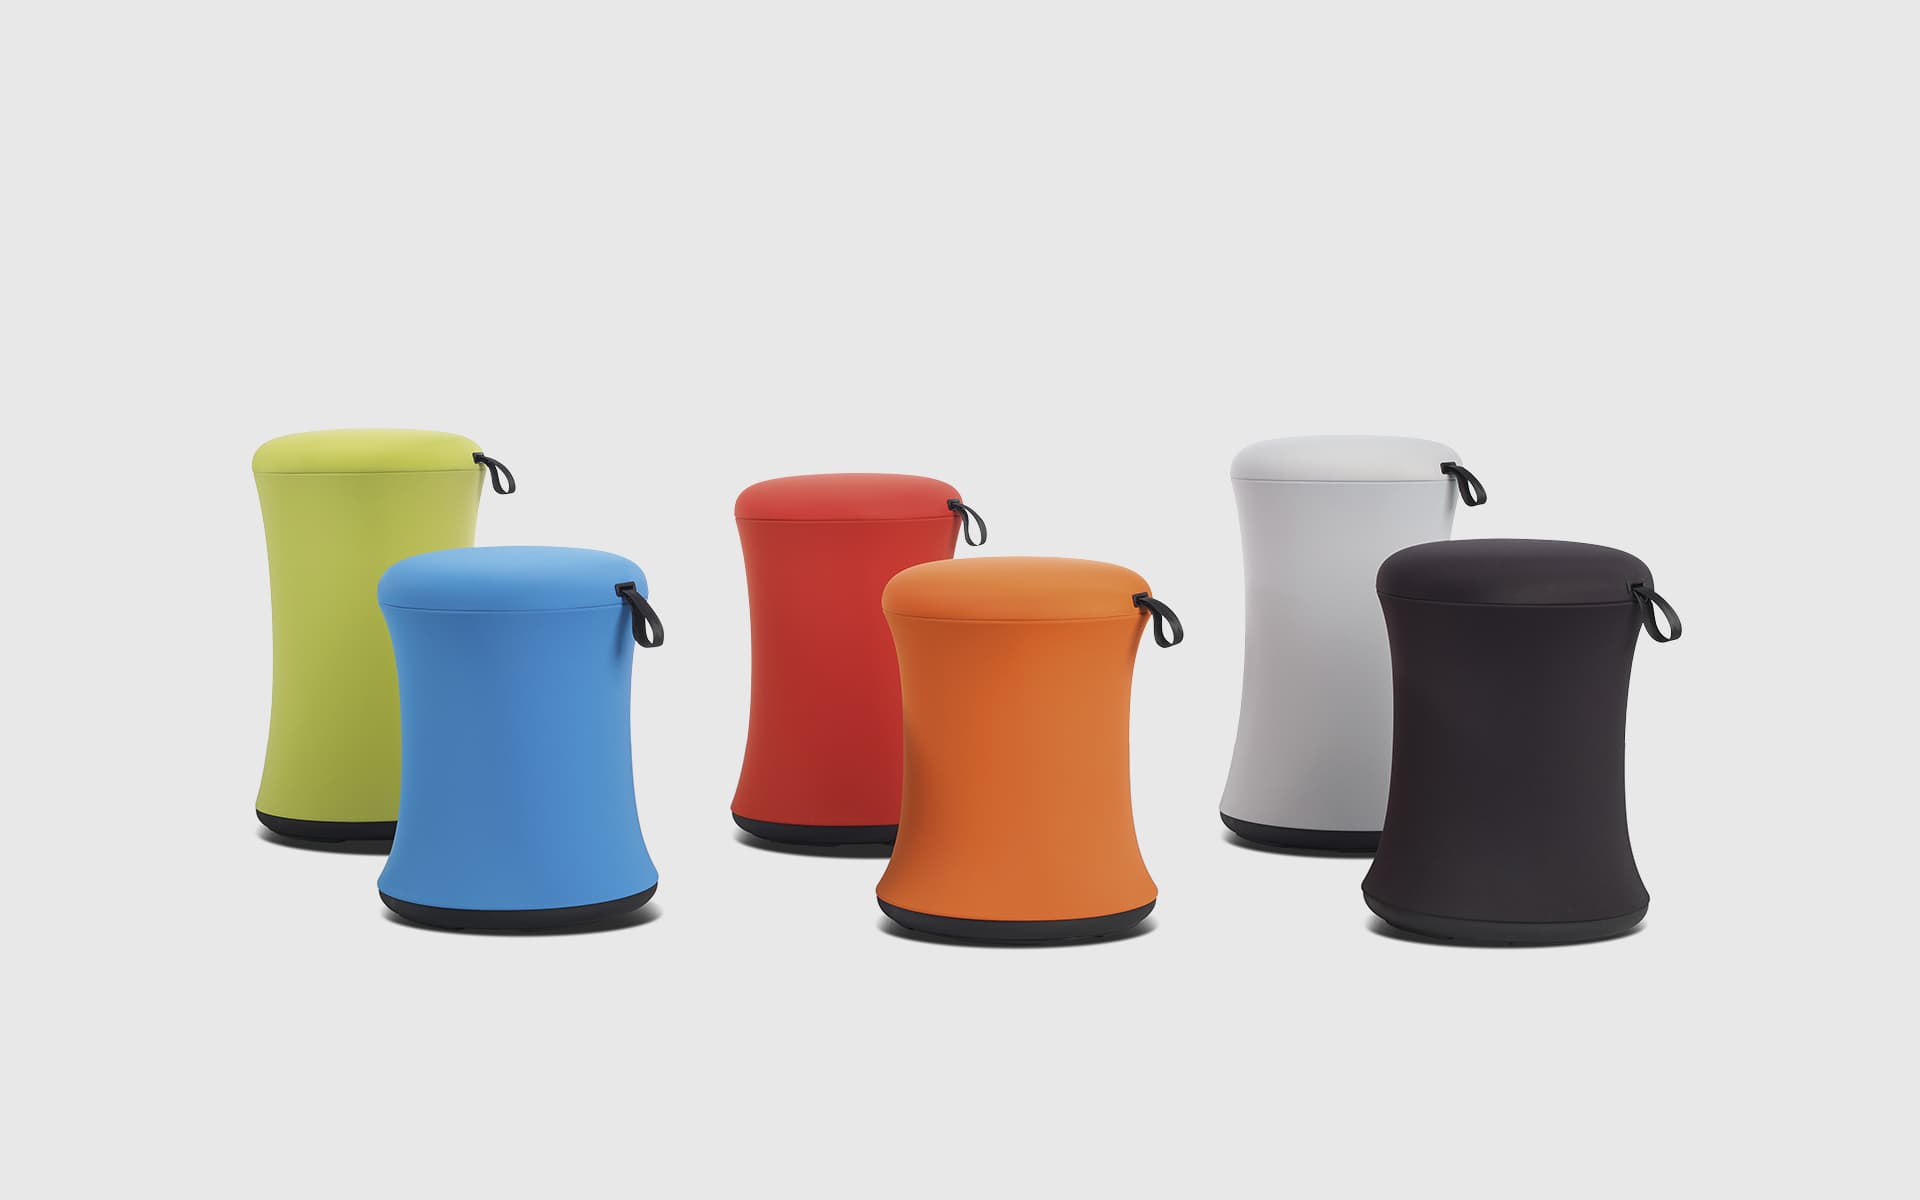 Six UE Furniture Uebobo stools by ITO Design in light green, light blue, bright red, orange, light grey and black